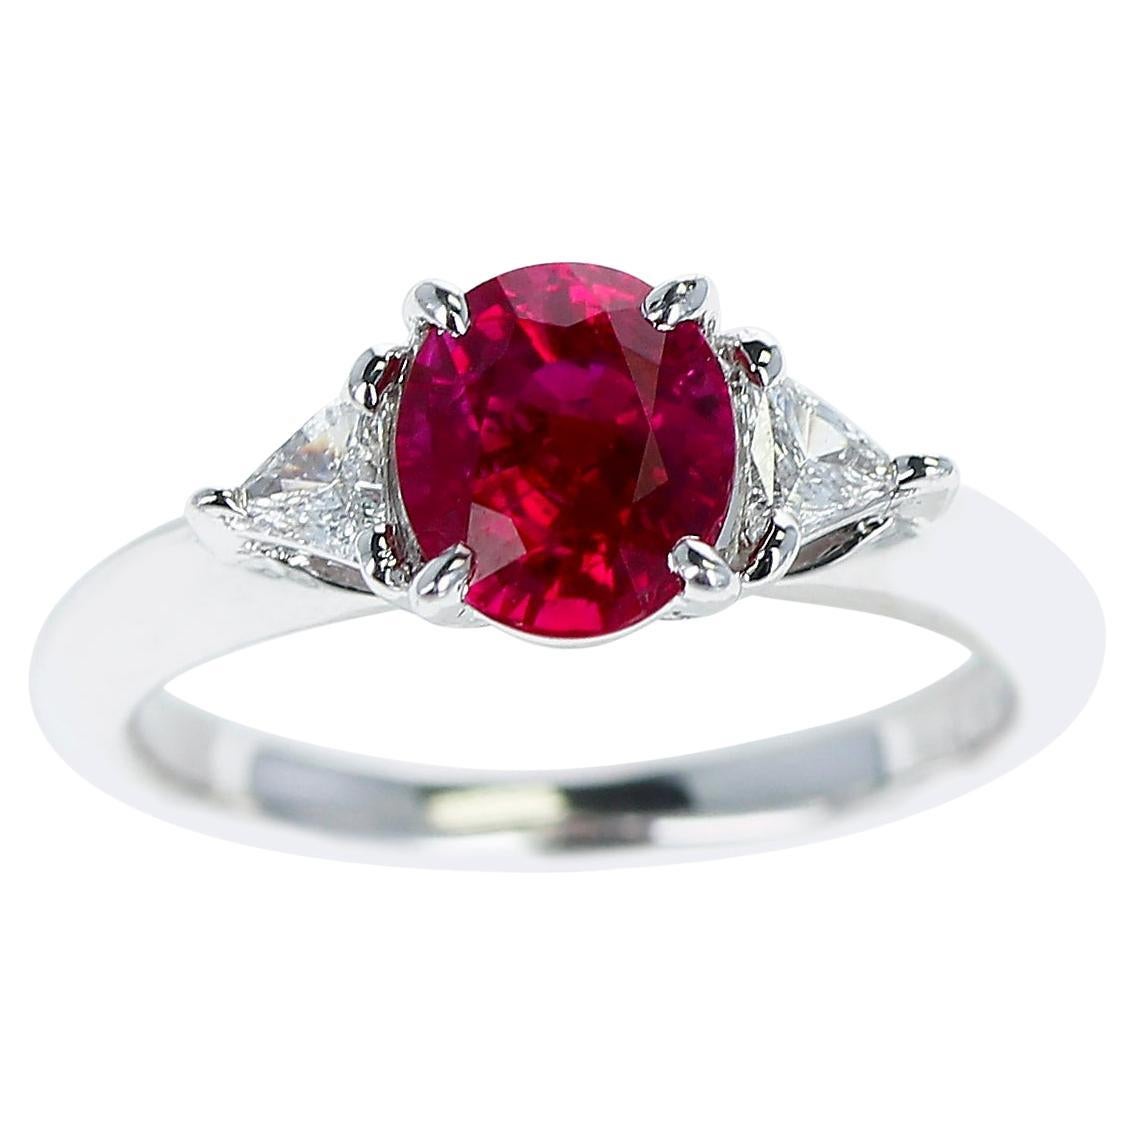 AGL Certified 1.19ct. Ruby and Diamond Ring, PT